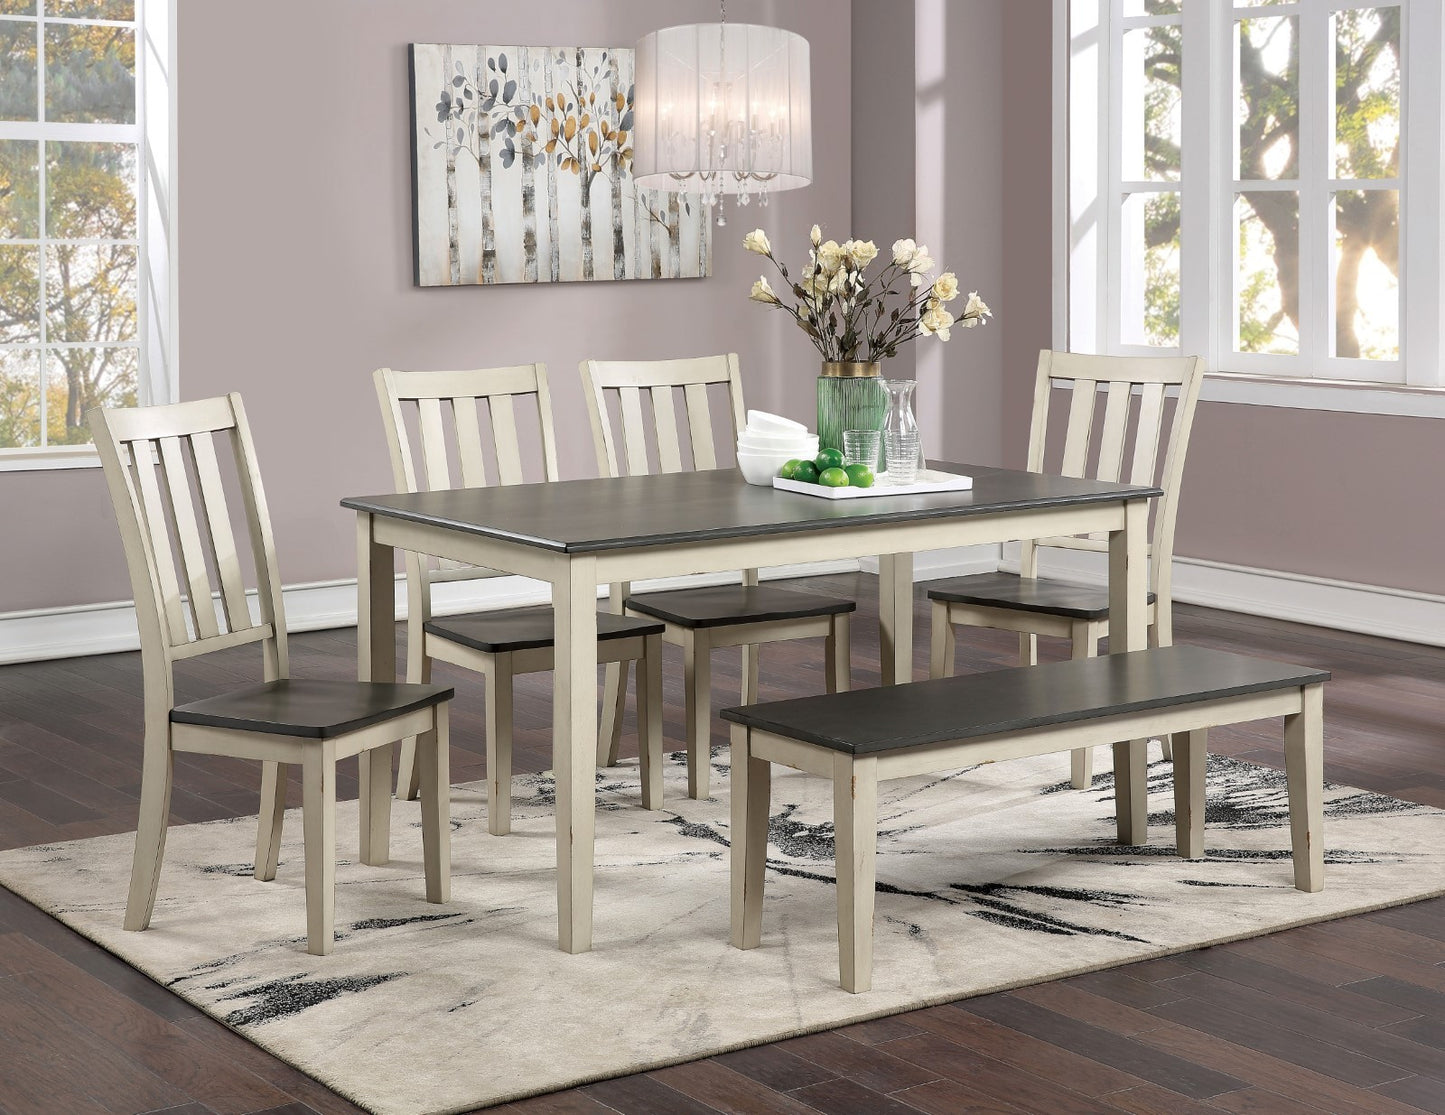 Dining Room Furniture 1pc Bench Only Dual Tone Design Antique White / Gray Solid wood